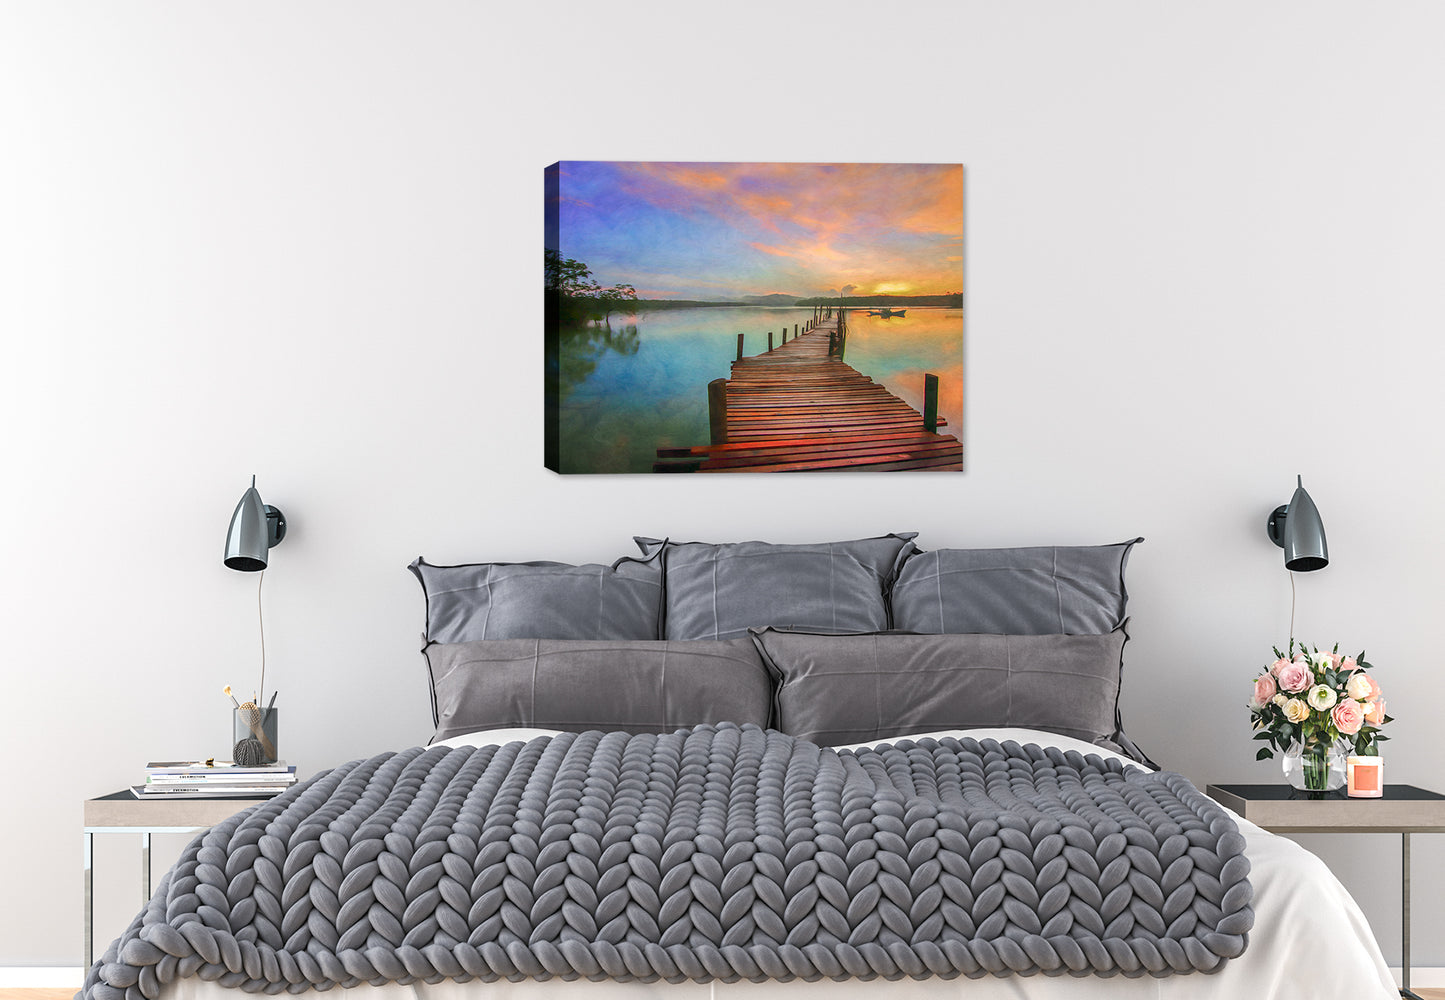 Boardwalk at Sunset on Still Waters - Oil on Canvas